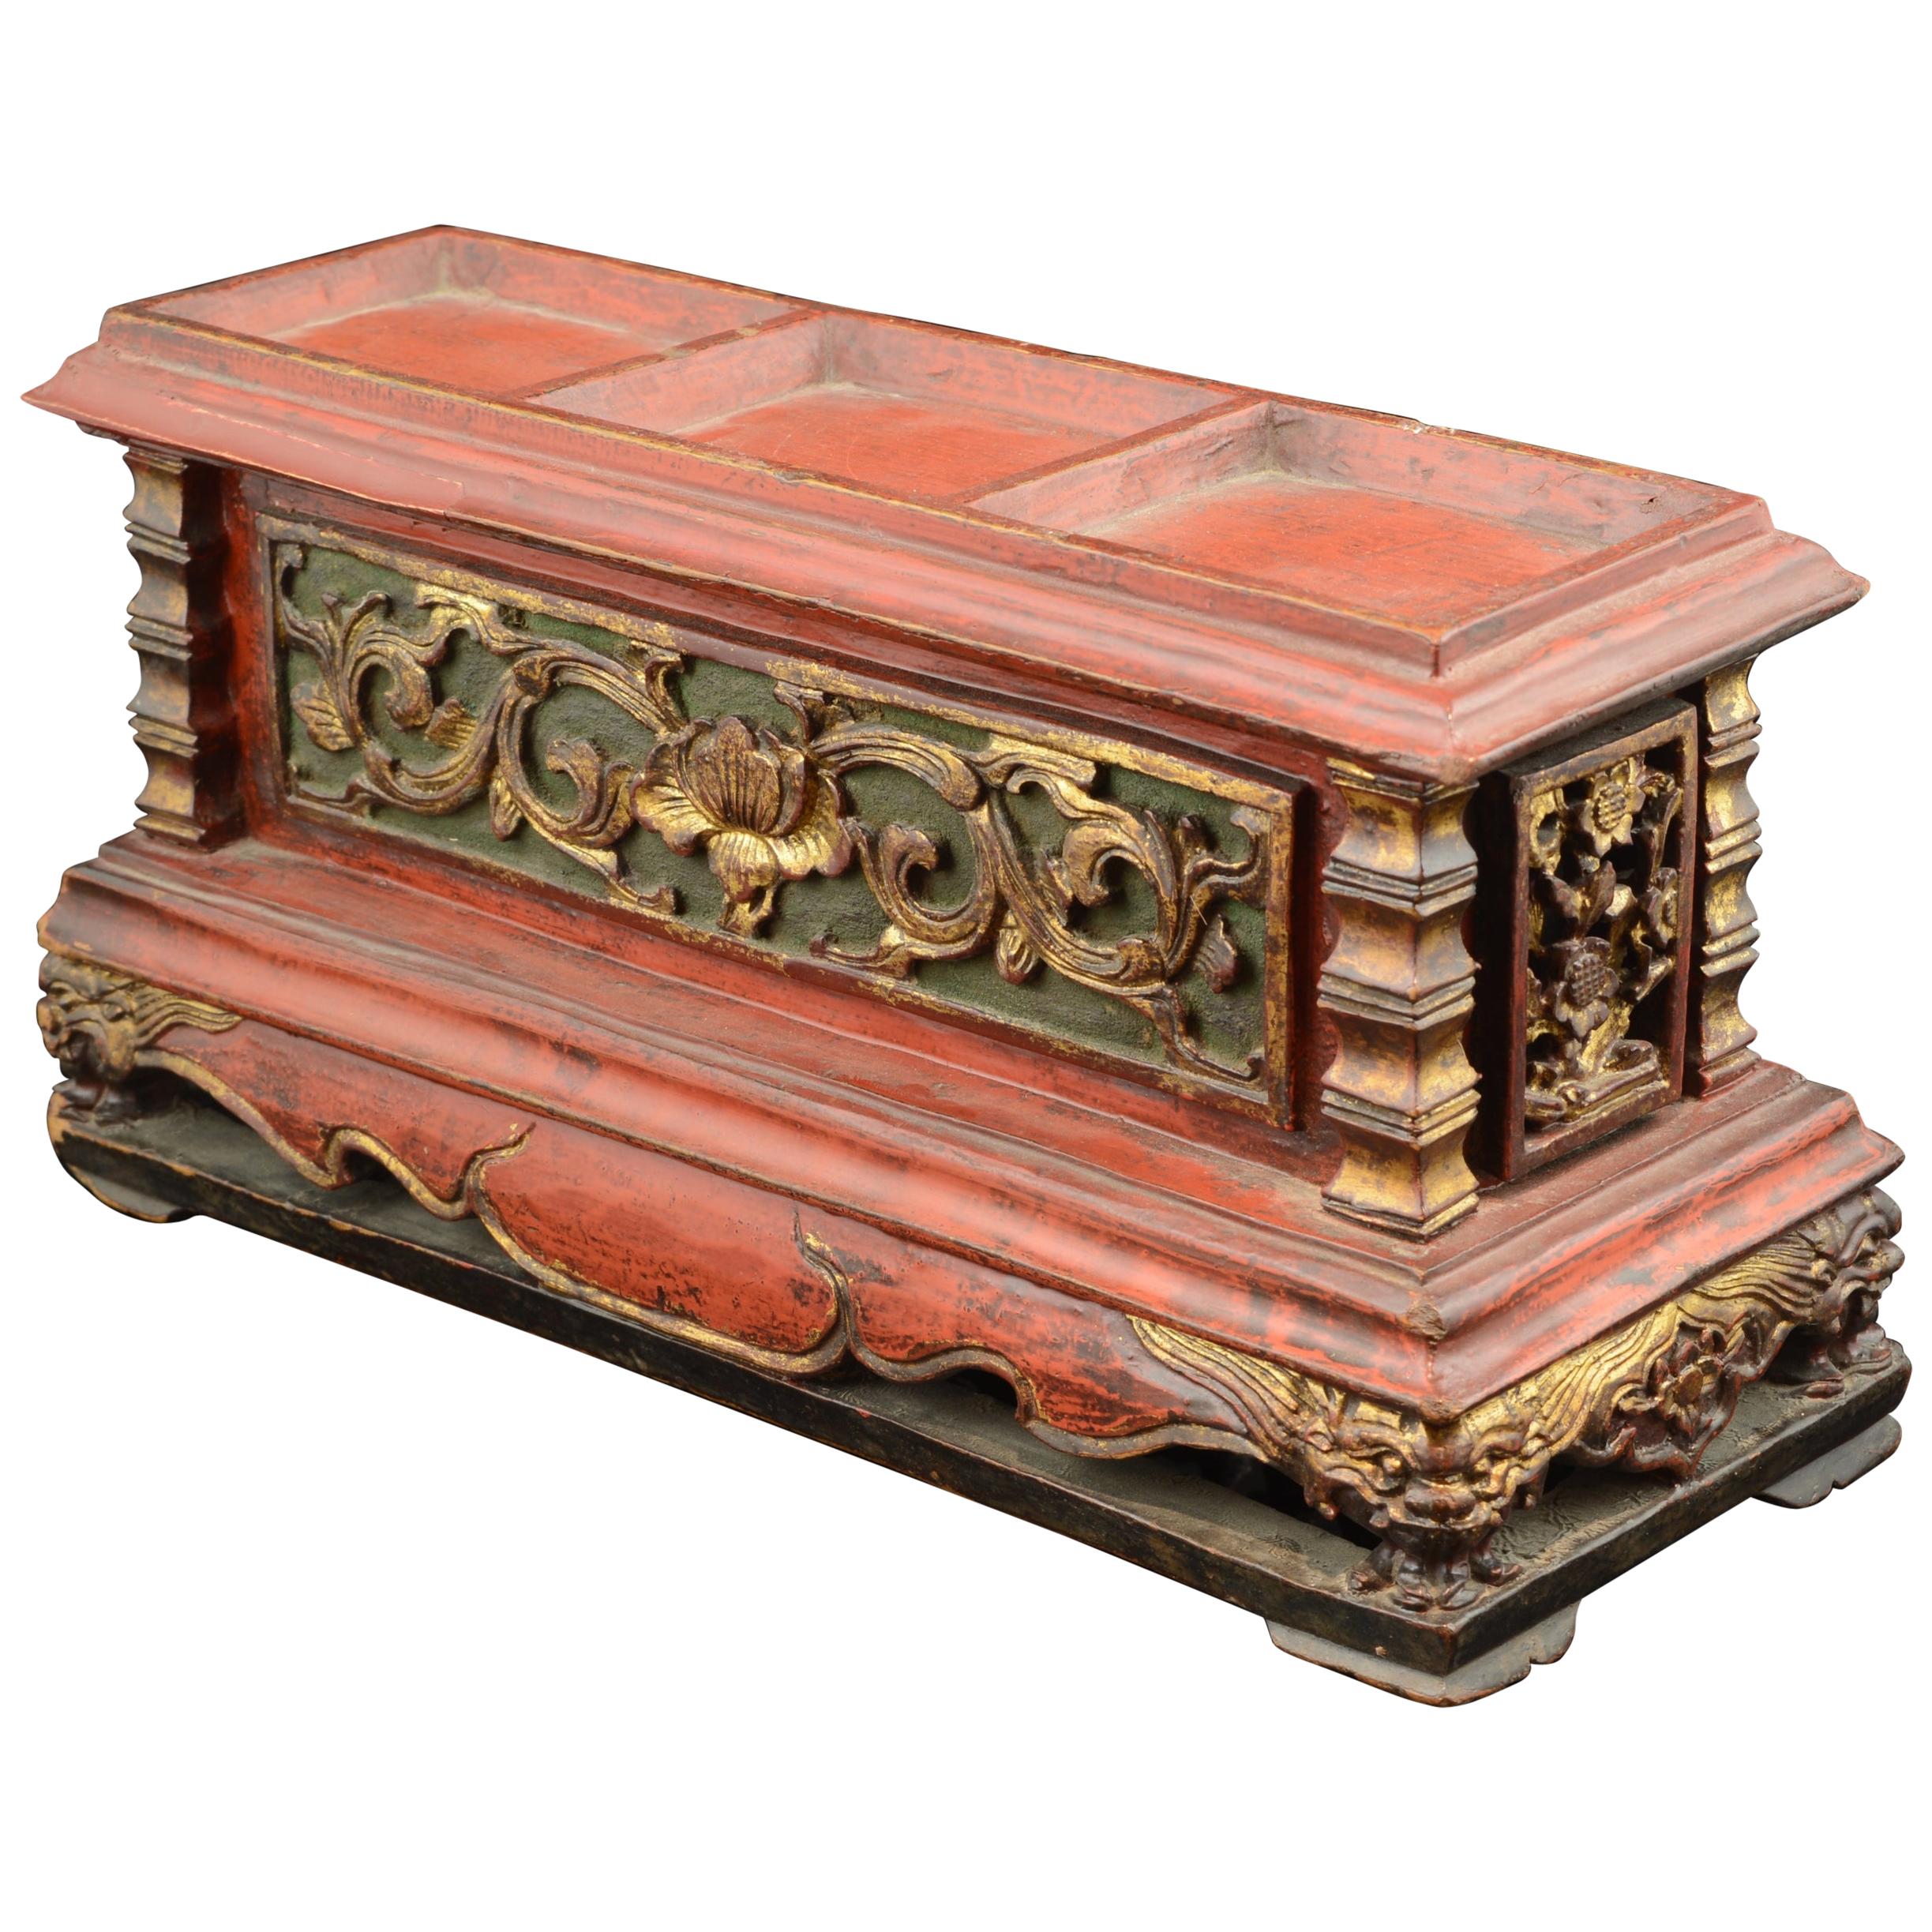 Offering Box "Chanab", Carved and Polychrome Wood, 19th Century